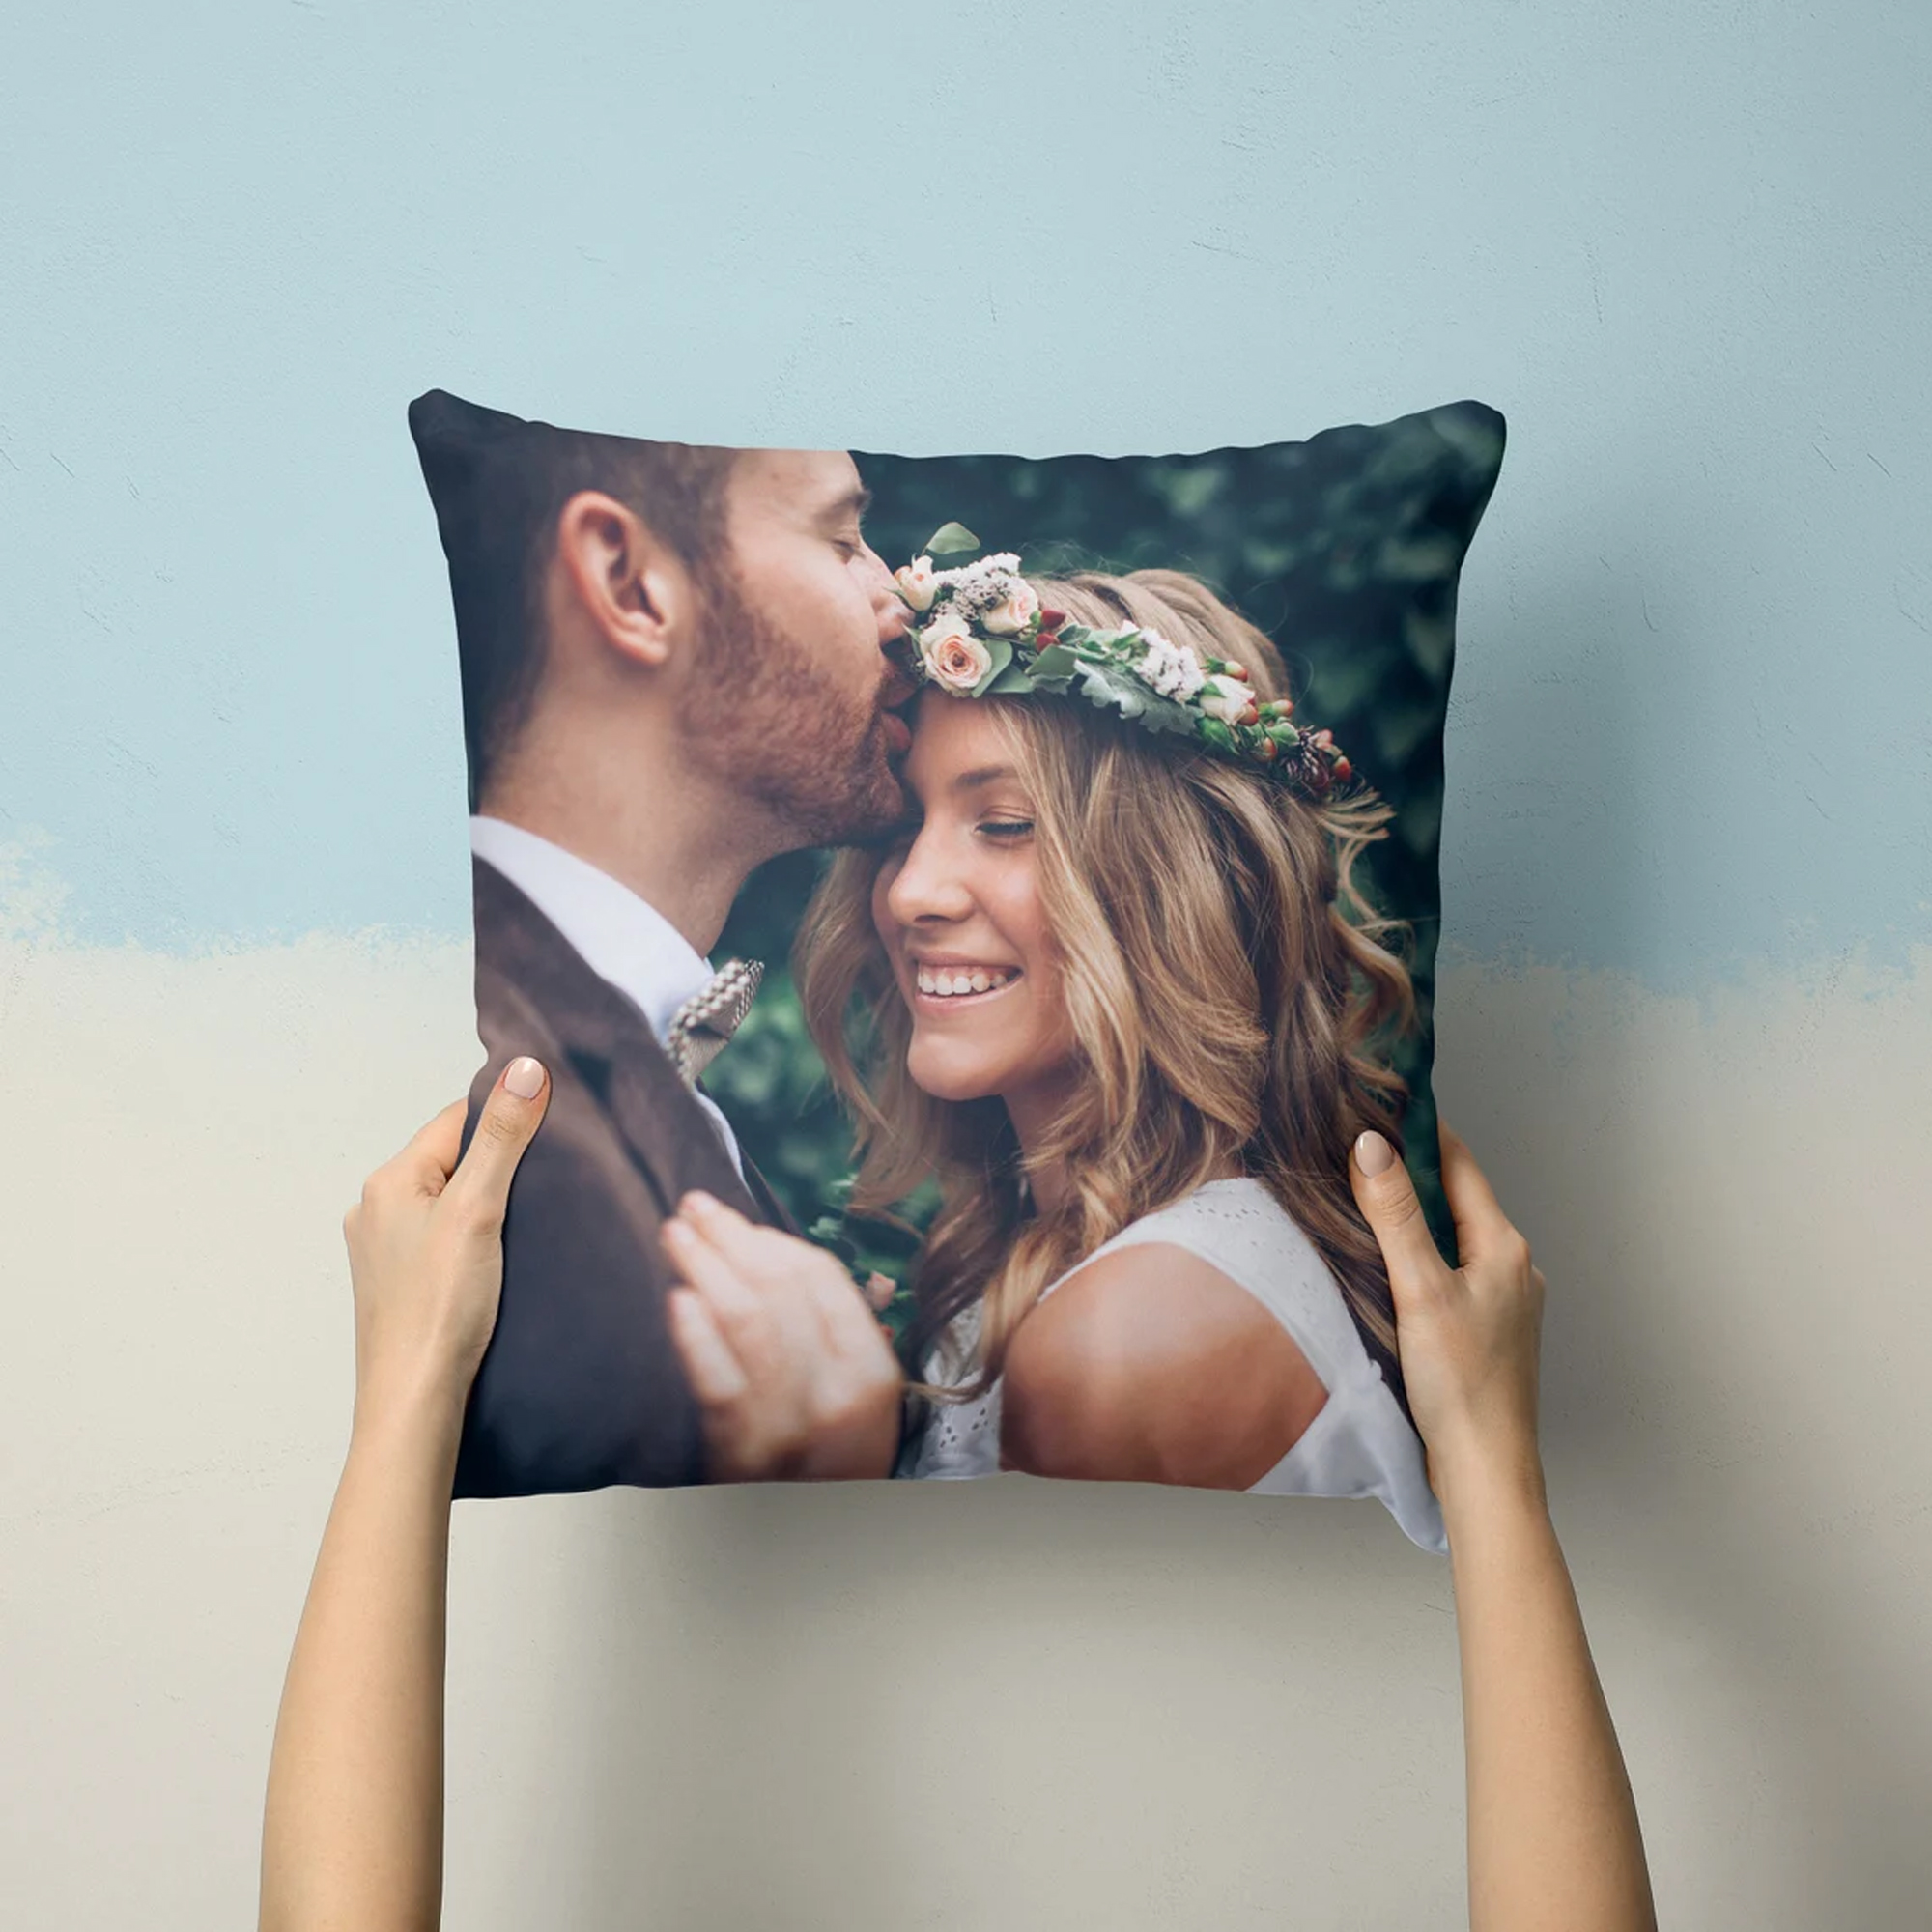 Custom Photo Pillow Case Personalized Pillowcase Wedding Gifts Anniversary Gift Mothers Day Gifts